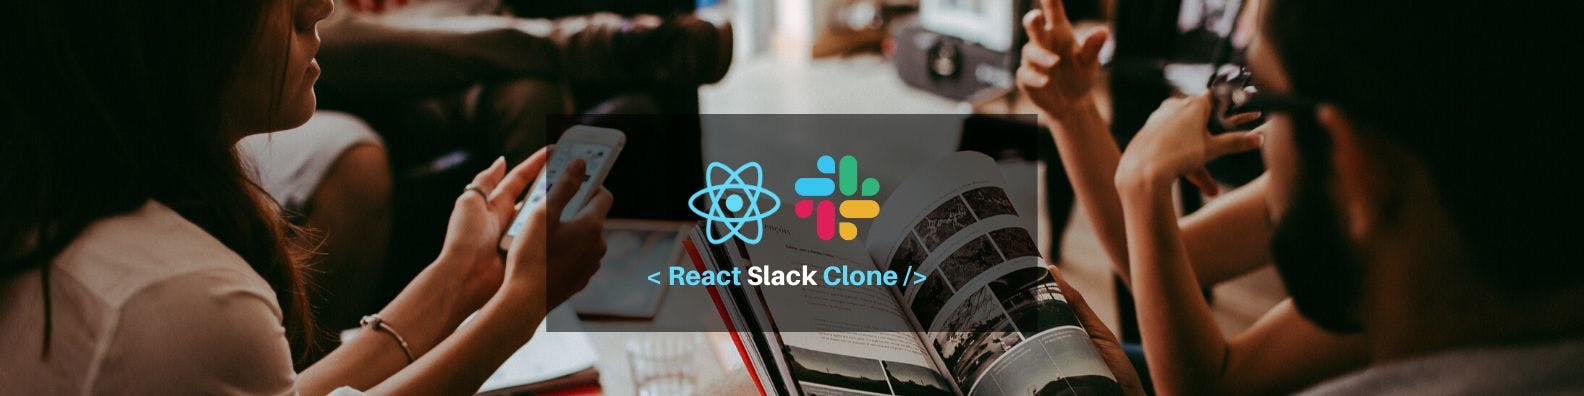 /how-to-build-a-slack-clone-with-react-firebase-and-cometchat-3r3037kq feature image